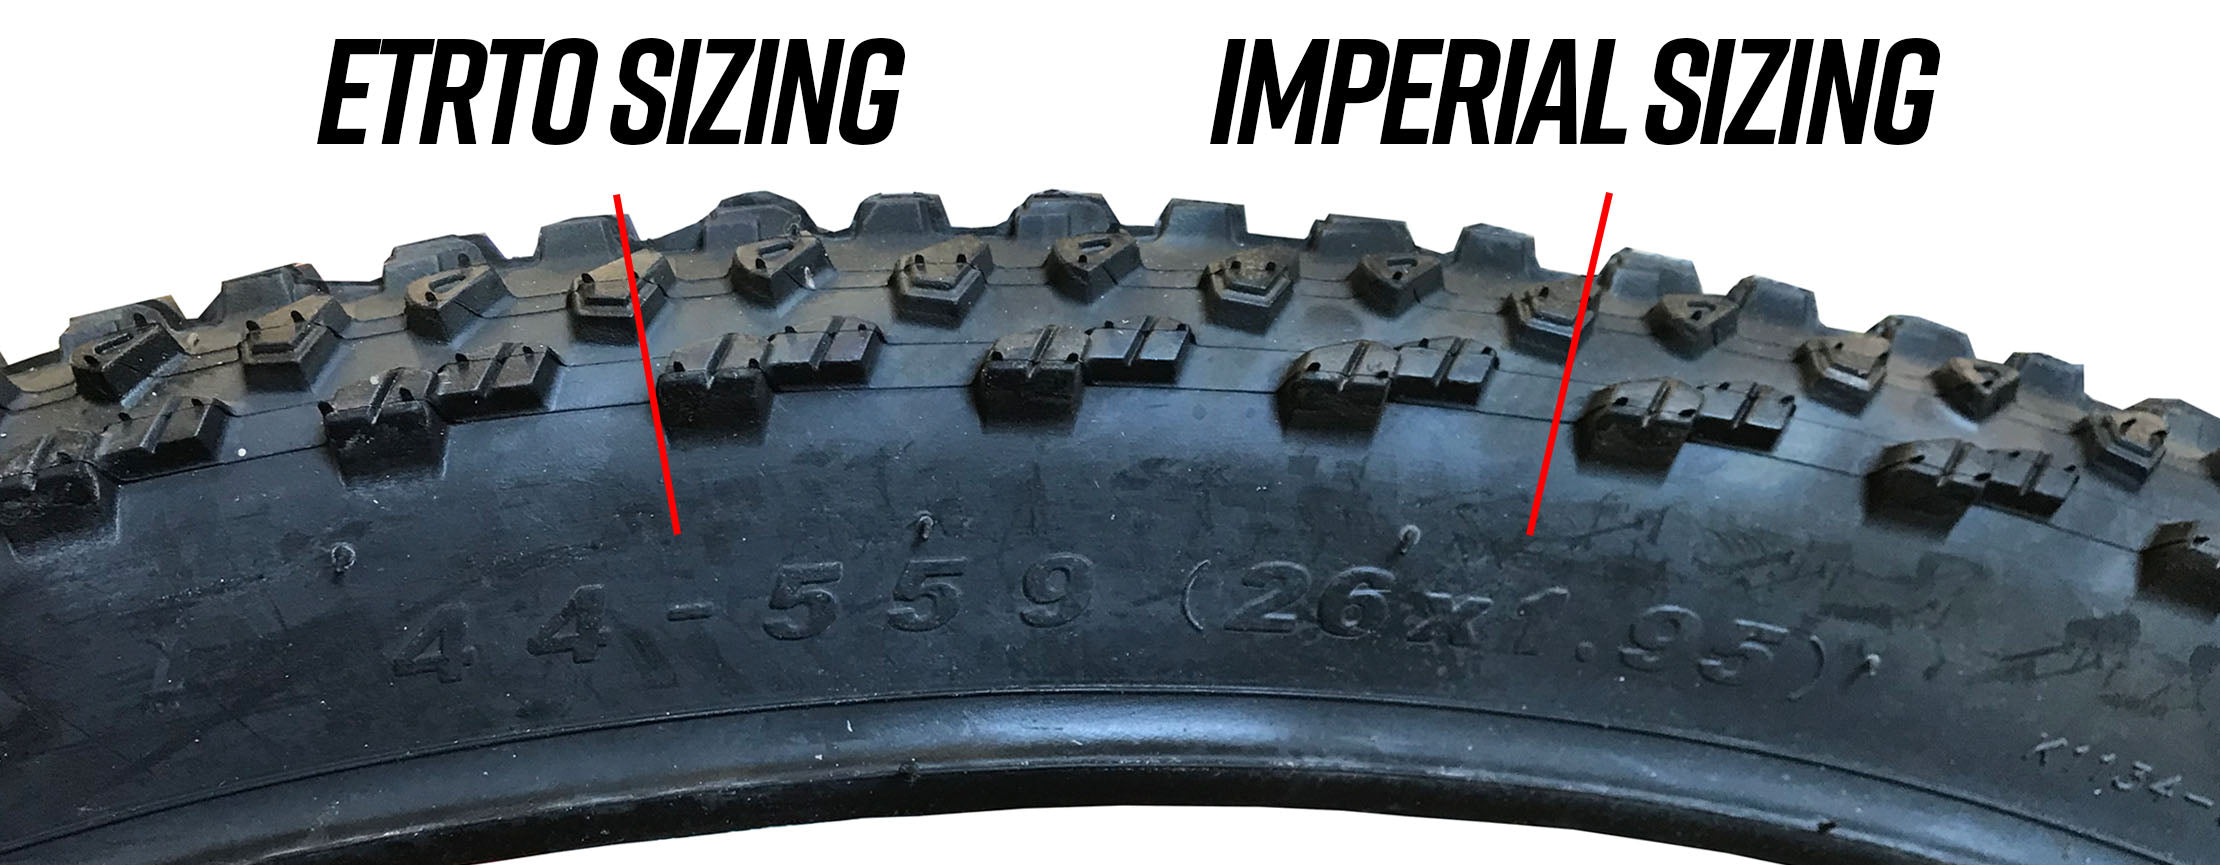 ETRTO Tyre Sizing and Imperial Tyre Sizing